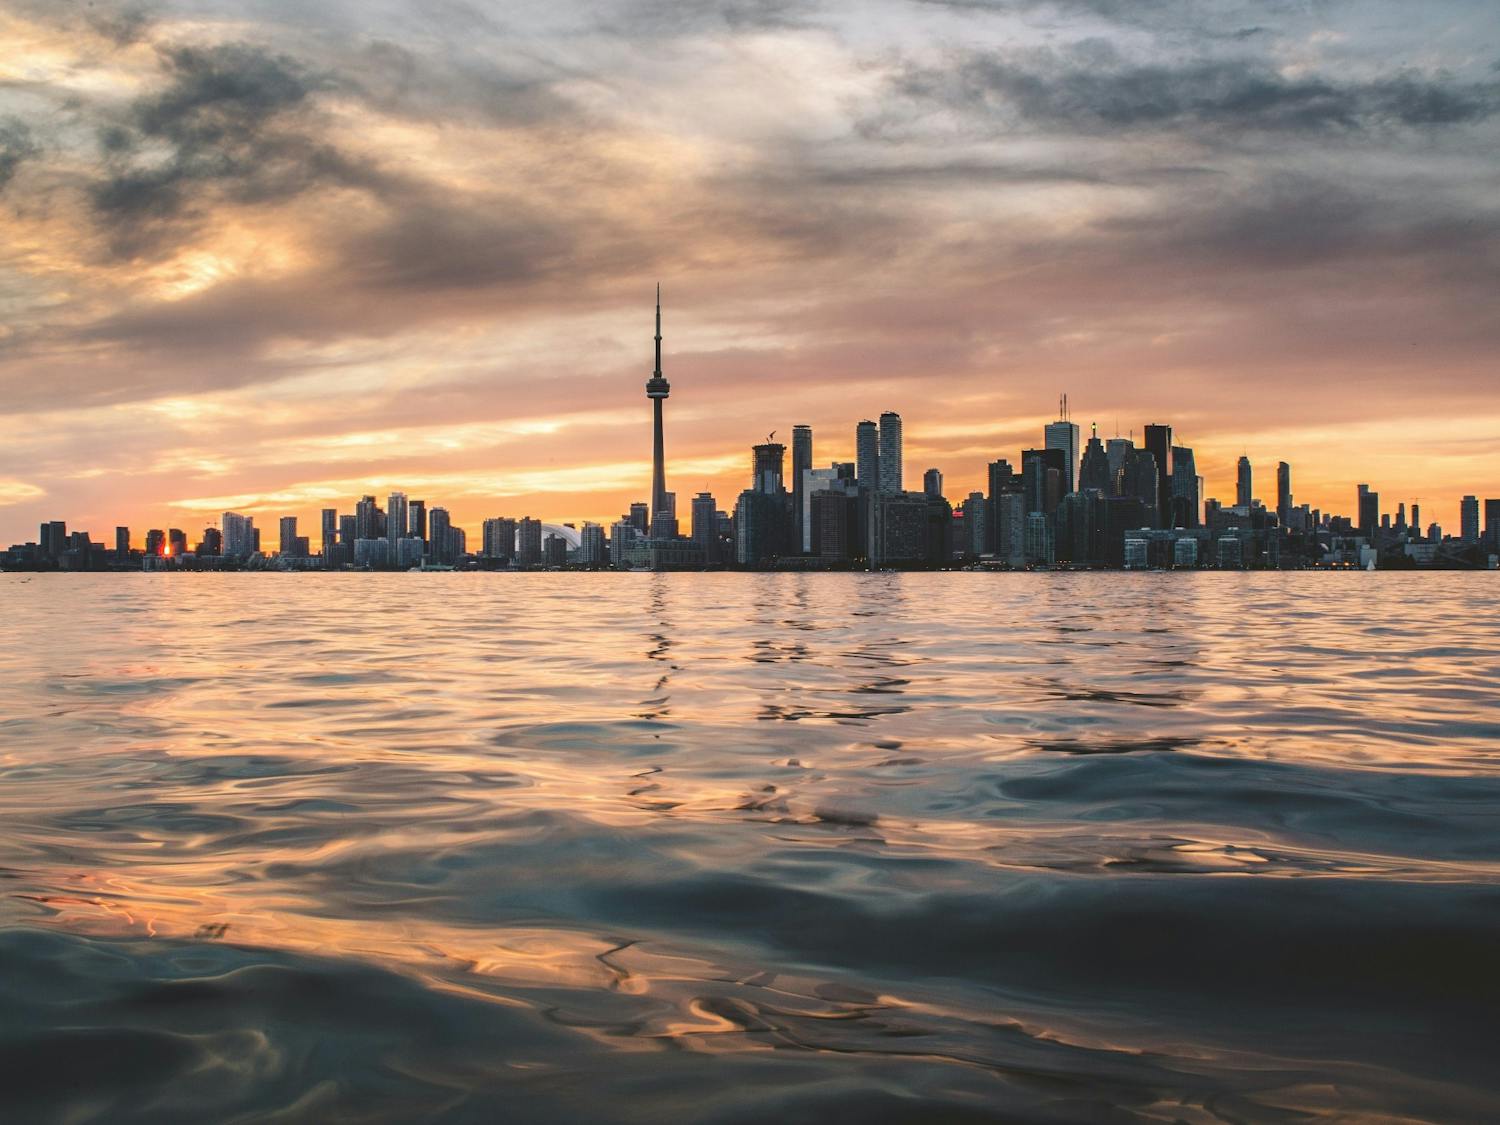 Toronto looms large over a body of water. Students should go to Canada with “literal strangers,” writes Reilly Mullen.